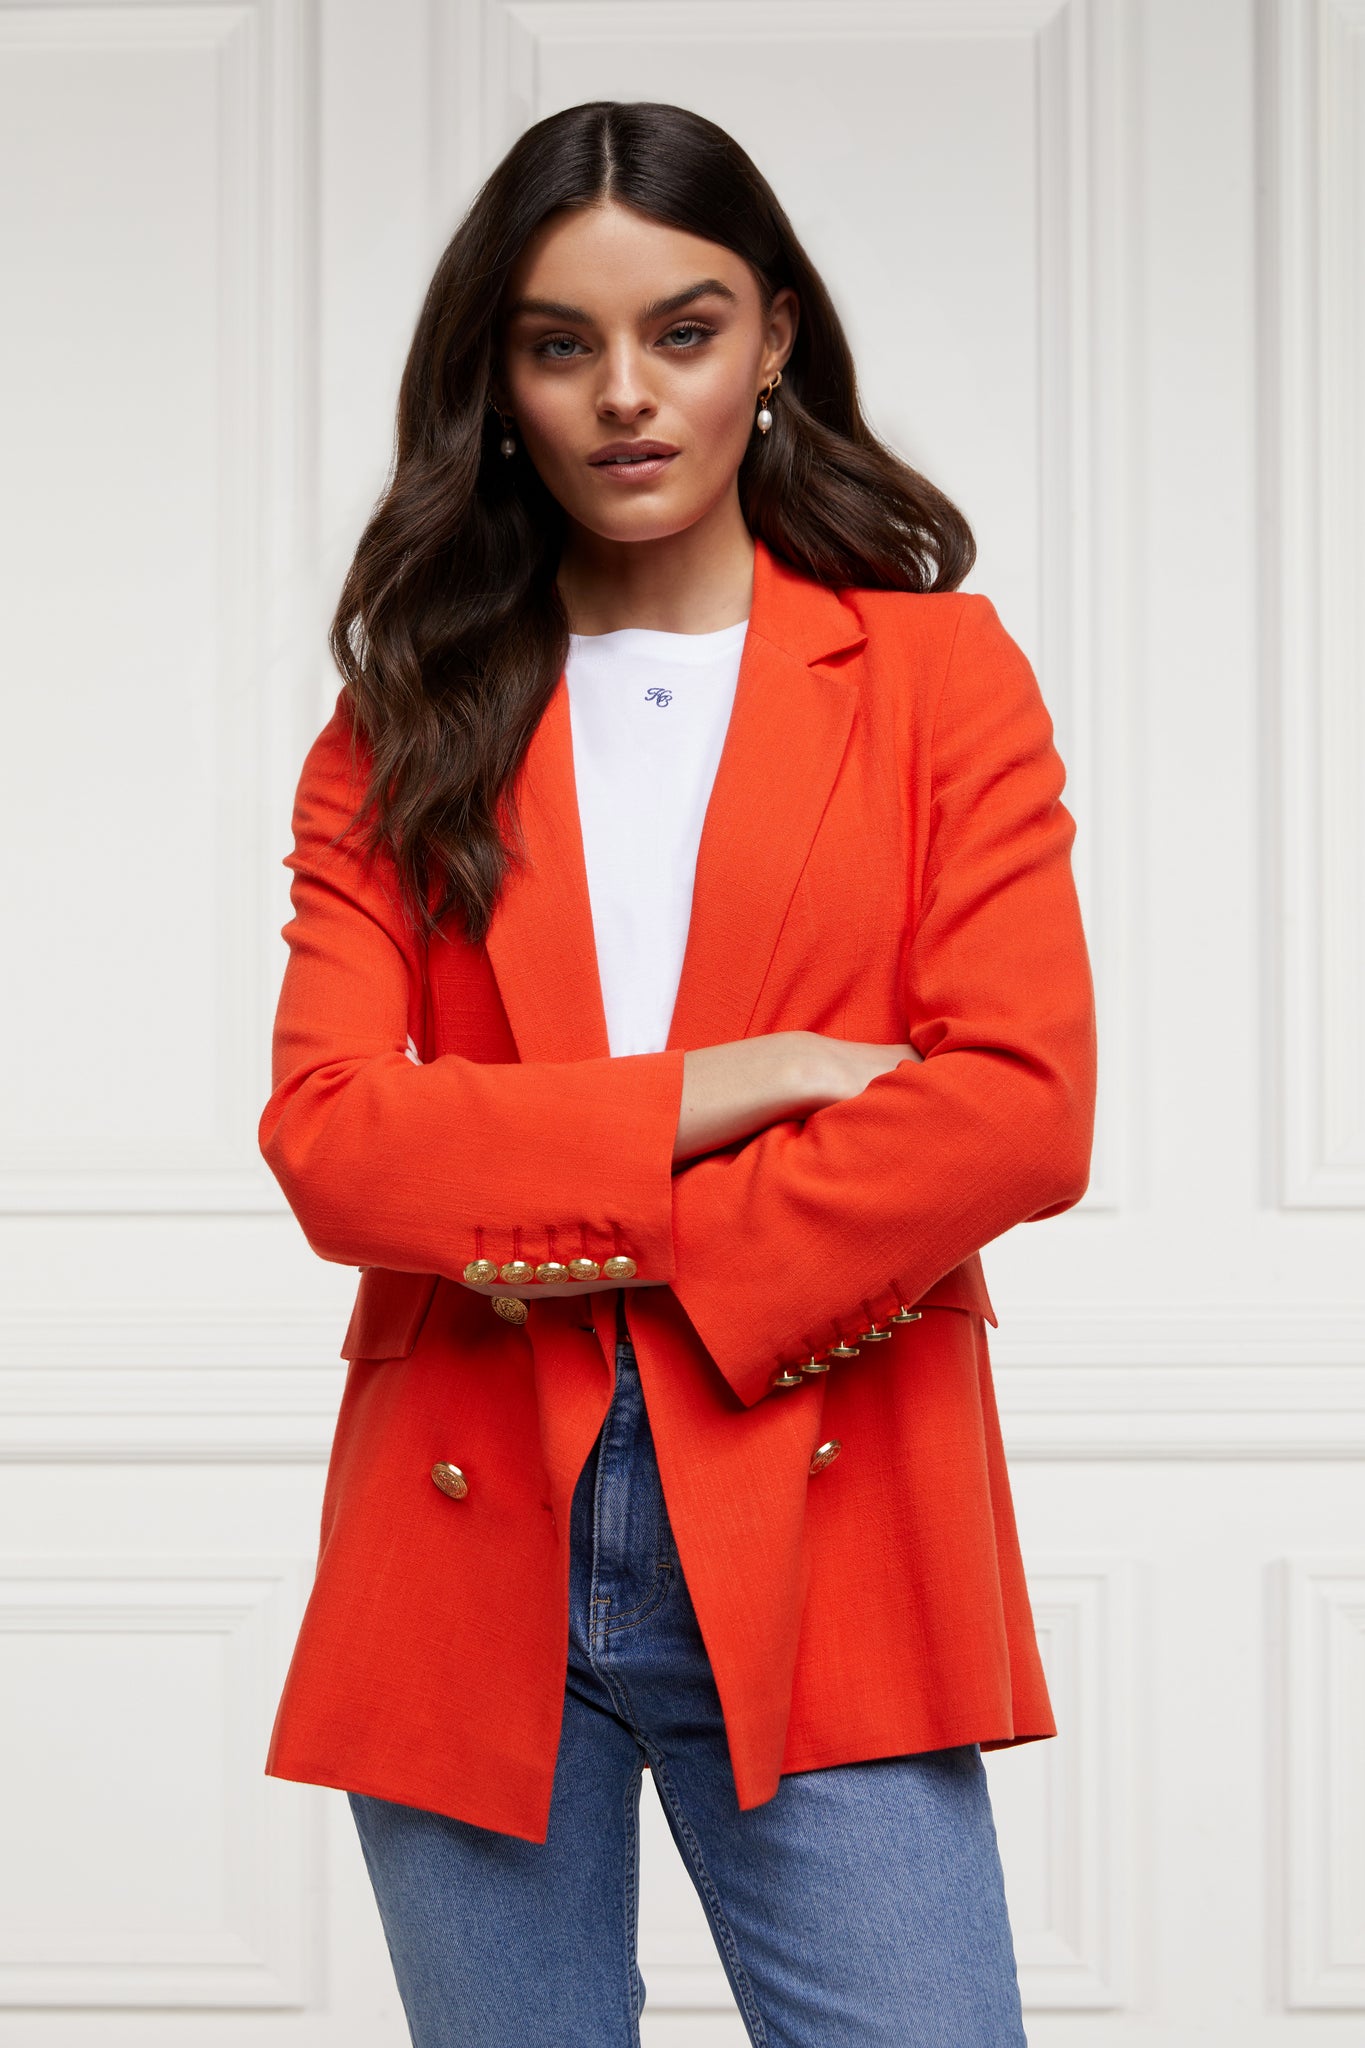 double breasted linen blazer in orange with two hip pockets and gold button detials down front and on cuffs and handmade in the uk worn with white tee and light blue denim jeans